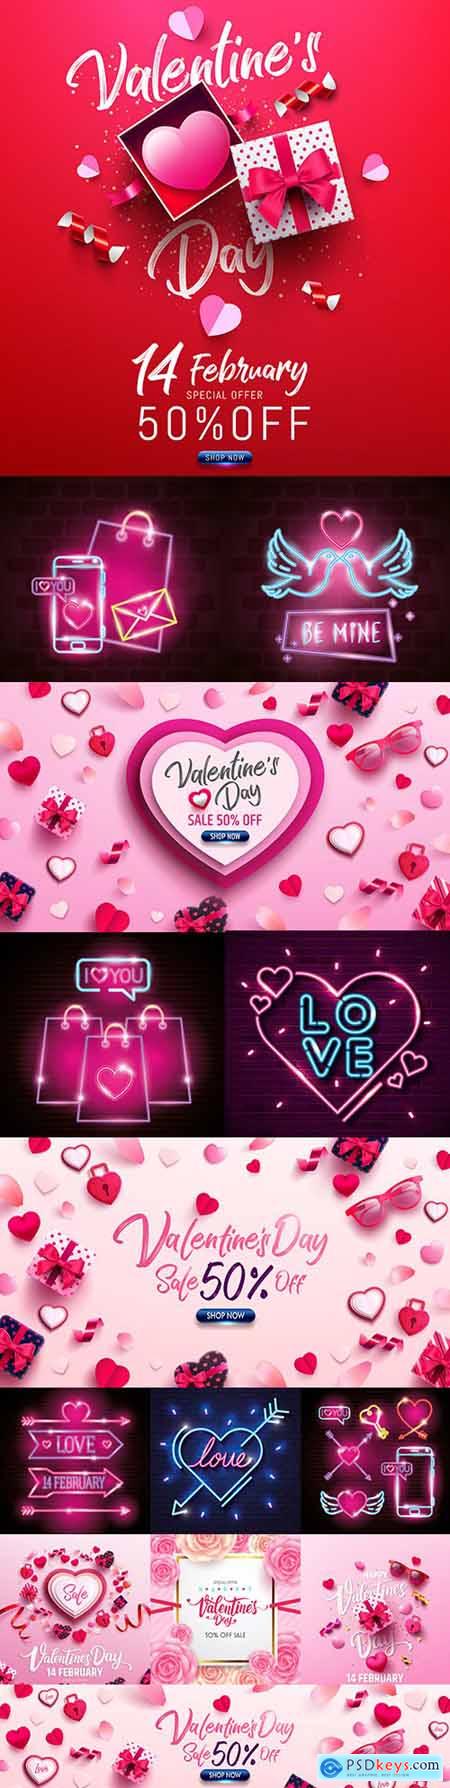 Valentines Day romantic elements and icons neon lights illustrations